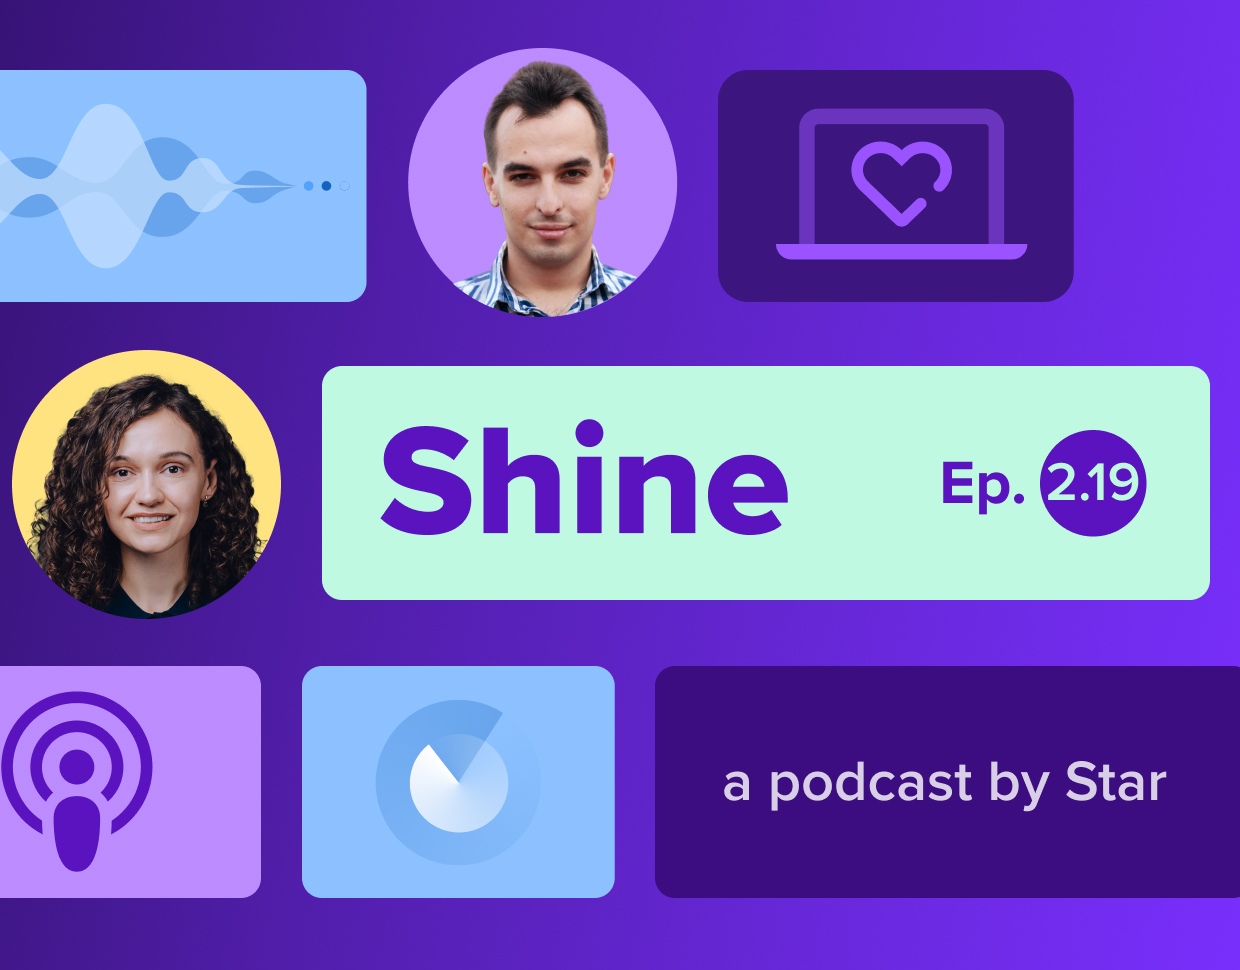 Shine: a podcast by Star, Ep. 2.19